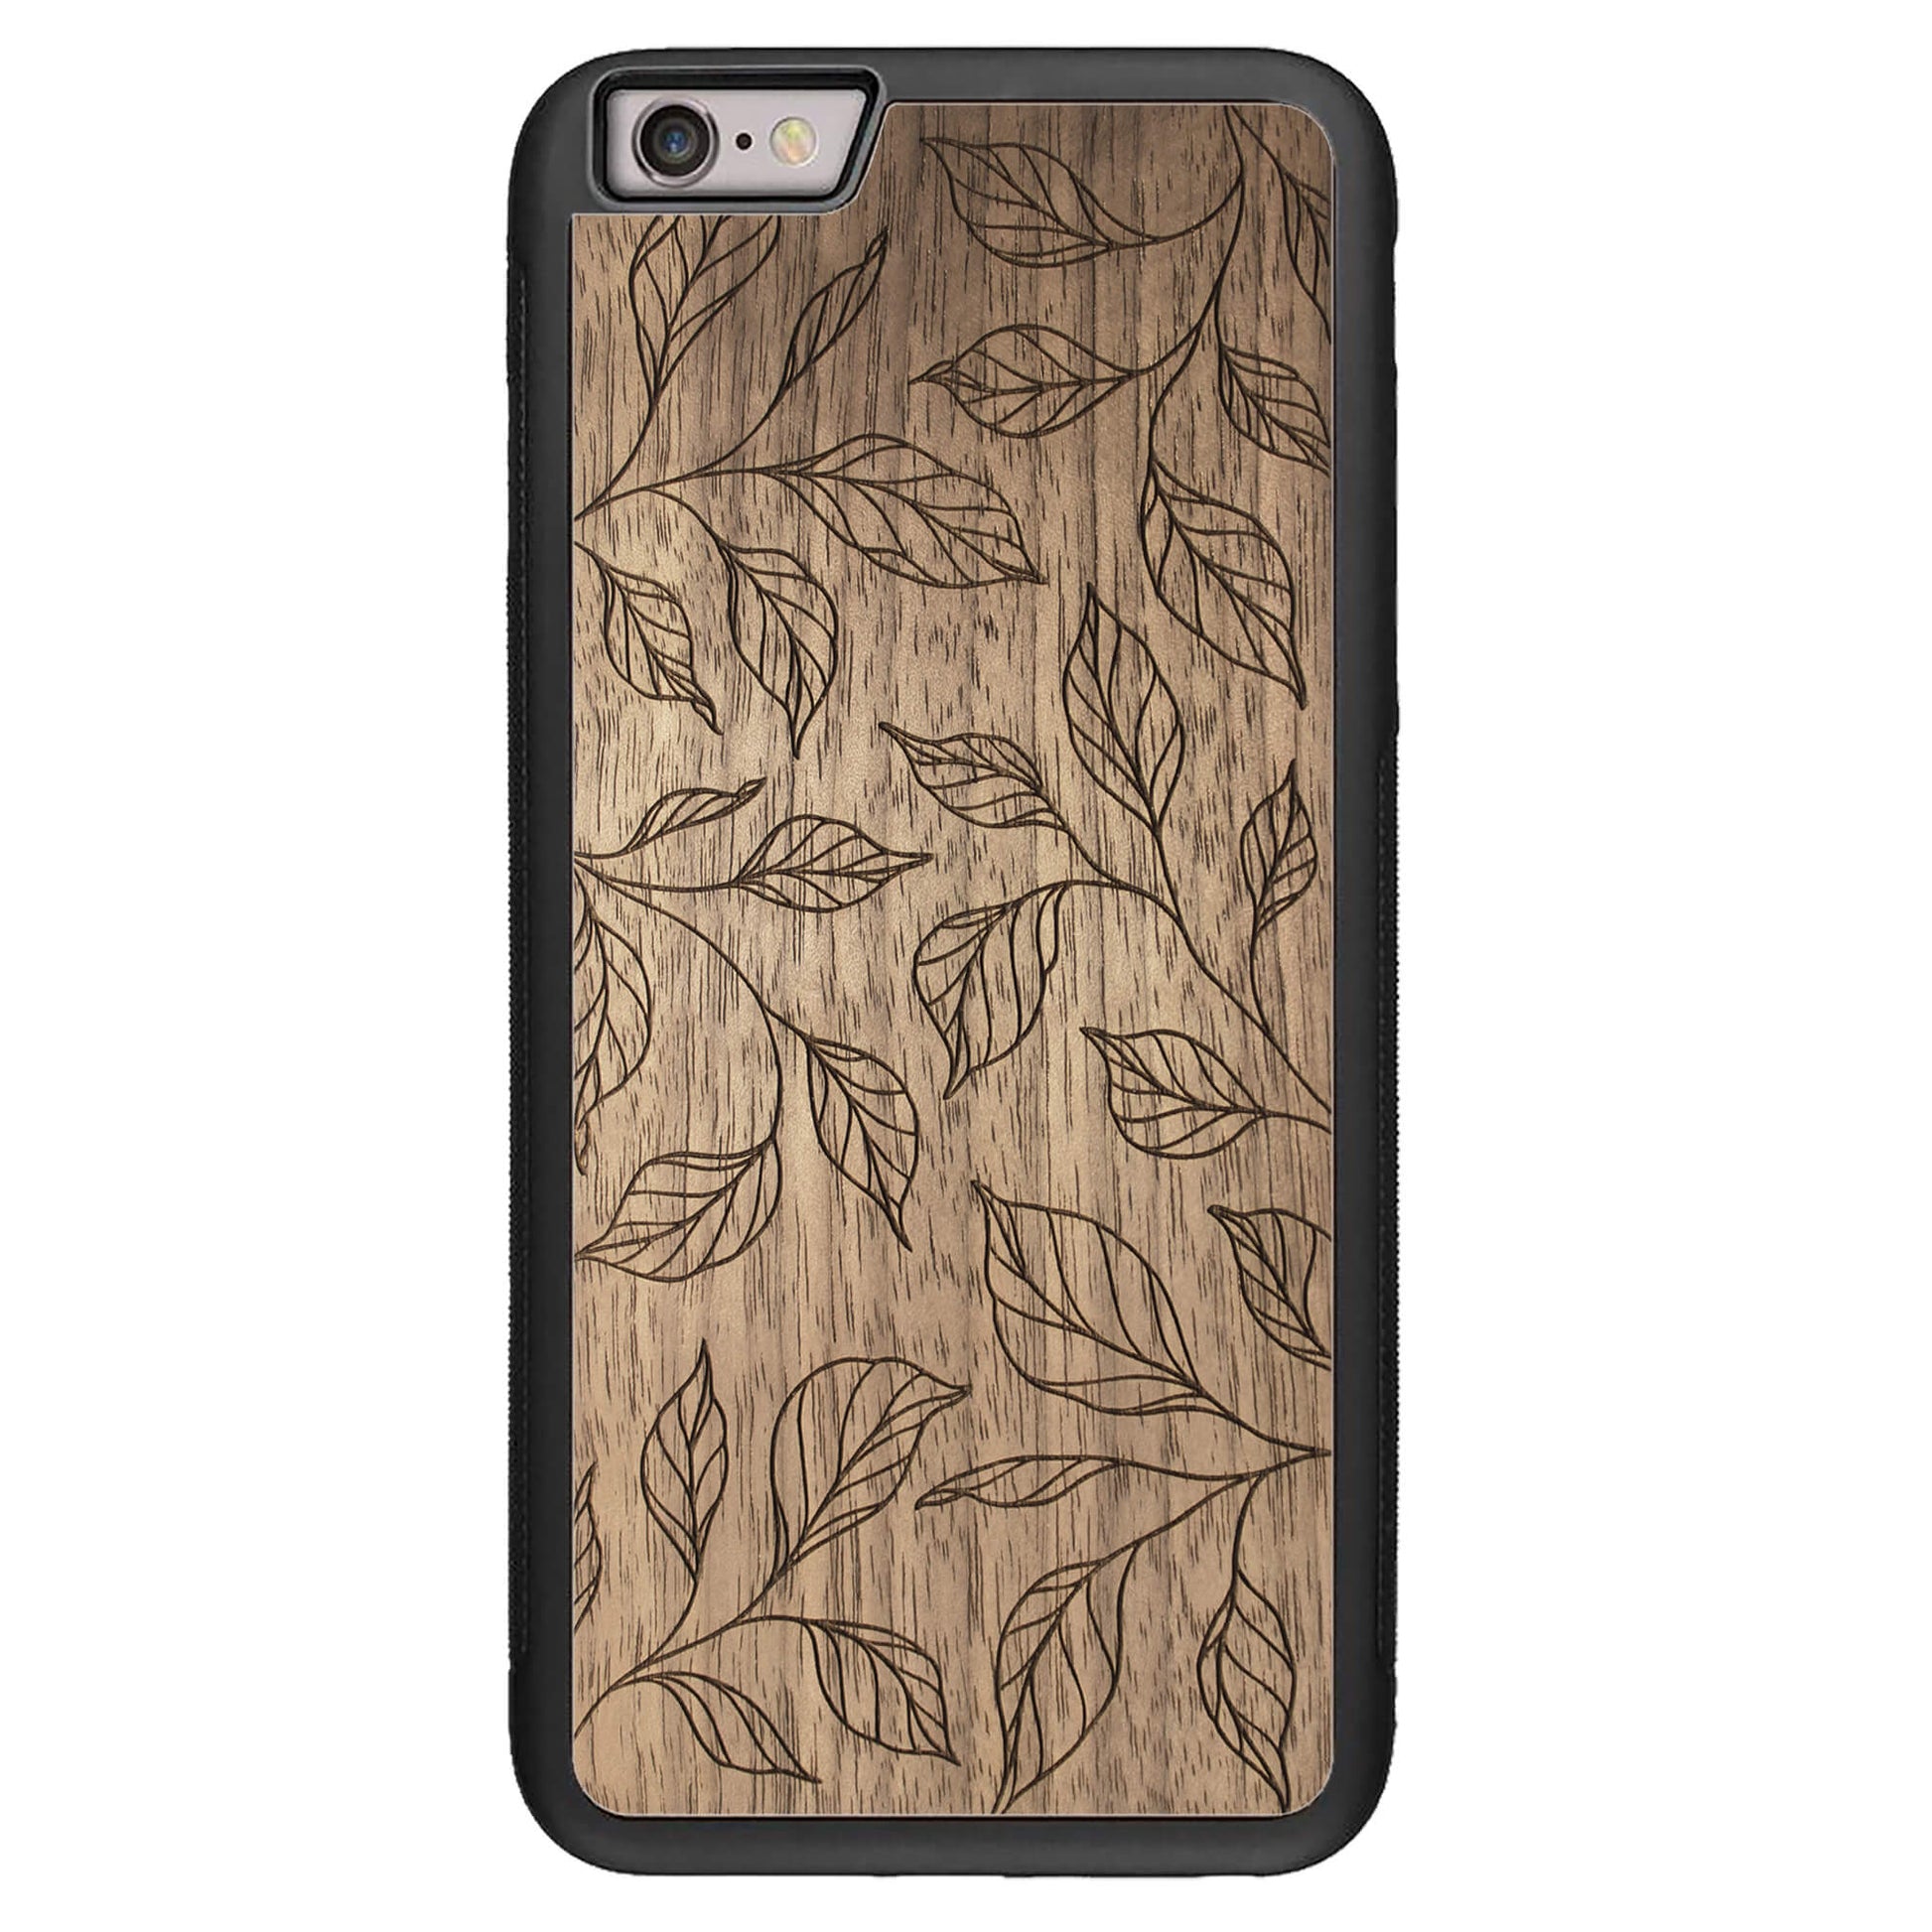 Wooden Case for iPhone 6/6S Plus Botanical Leaves